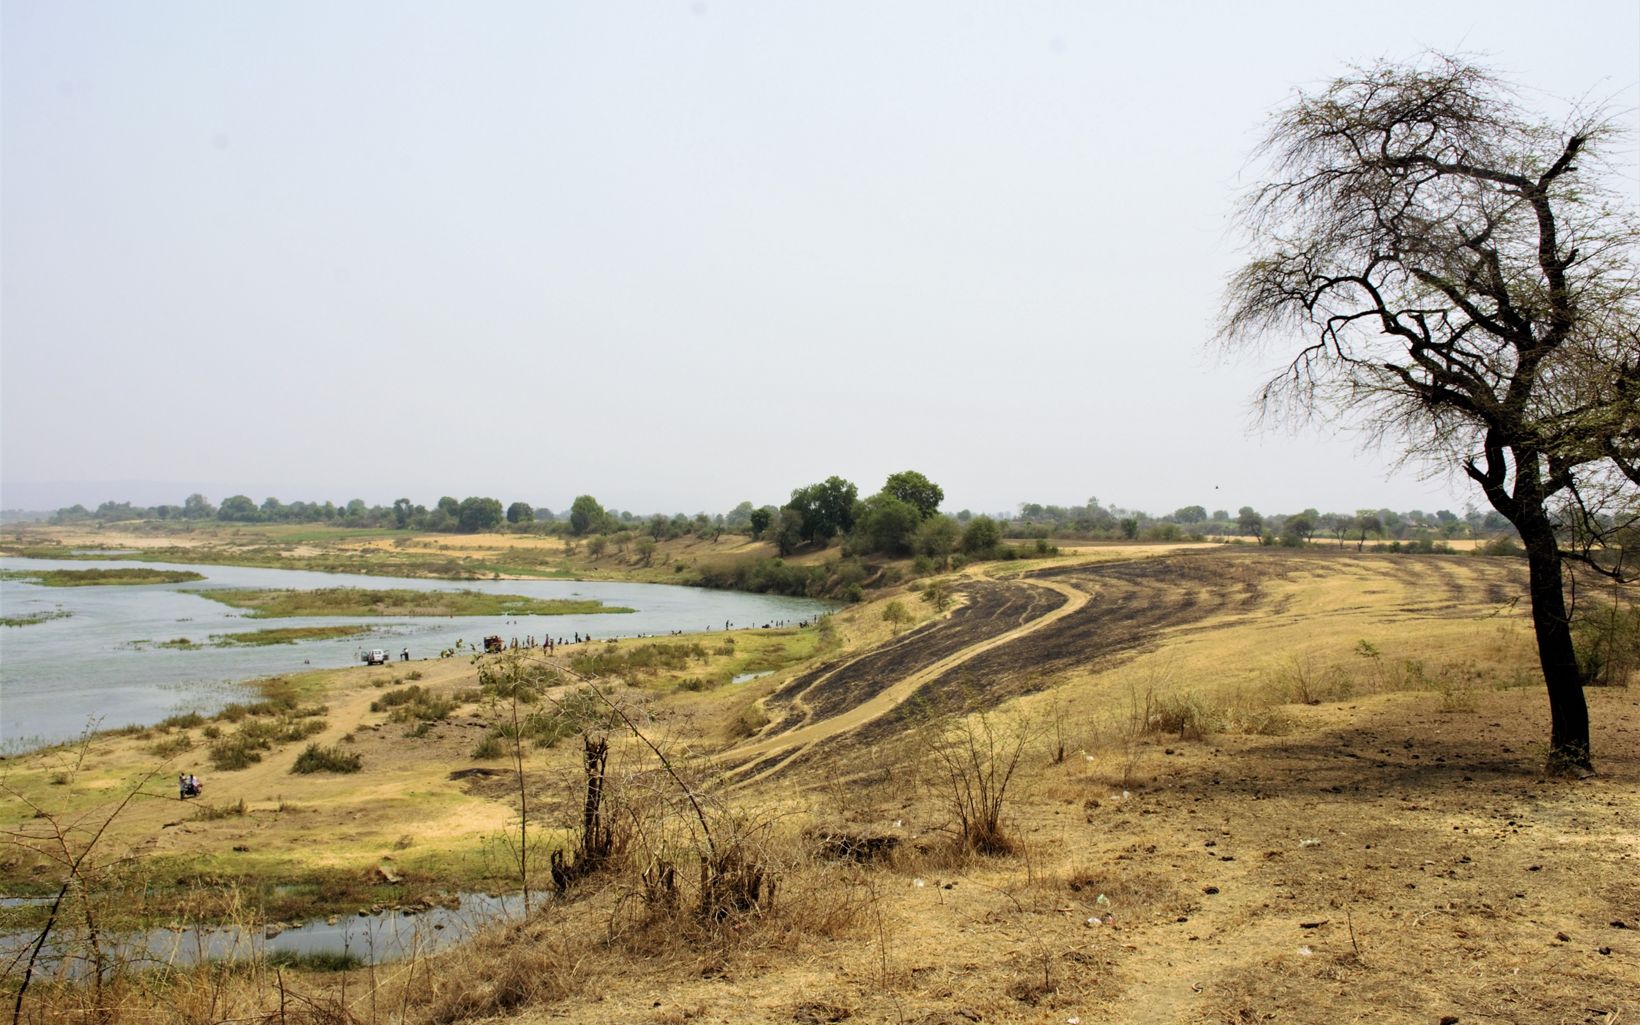 riverside banks converted to agricultural lands face the threat of crop residue burning